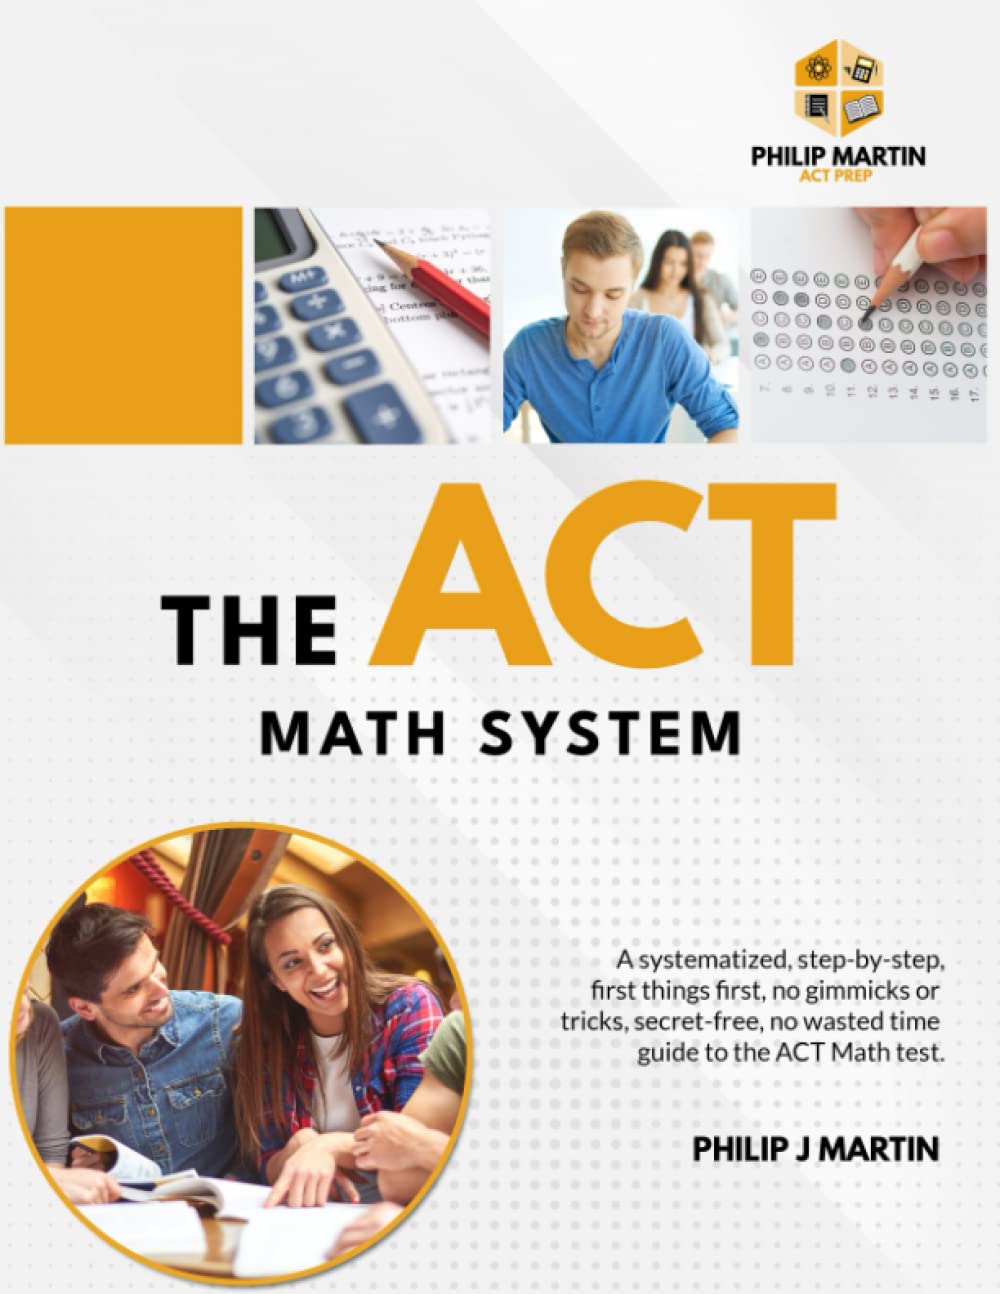 The ACT Math System: A systematized, step-by-step, first things first, no gimmicks or tricks, secret-free, no wasted time guide to the ACT Math test. (The ACT System)